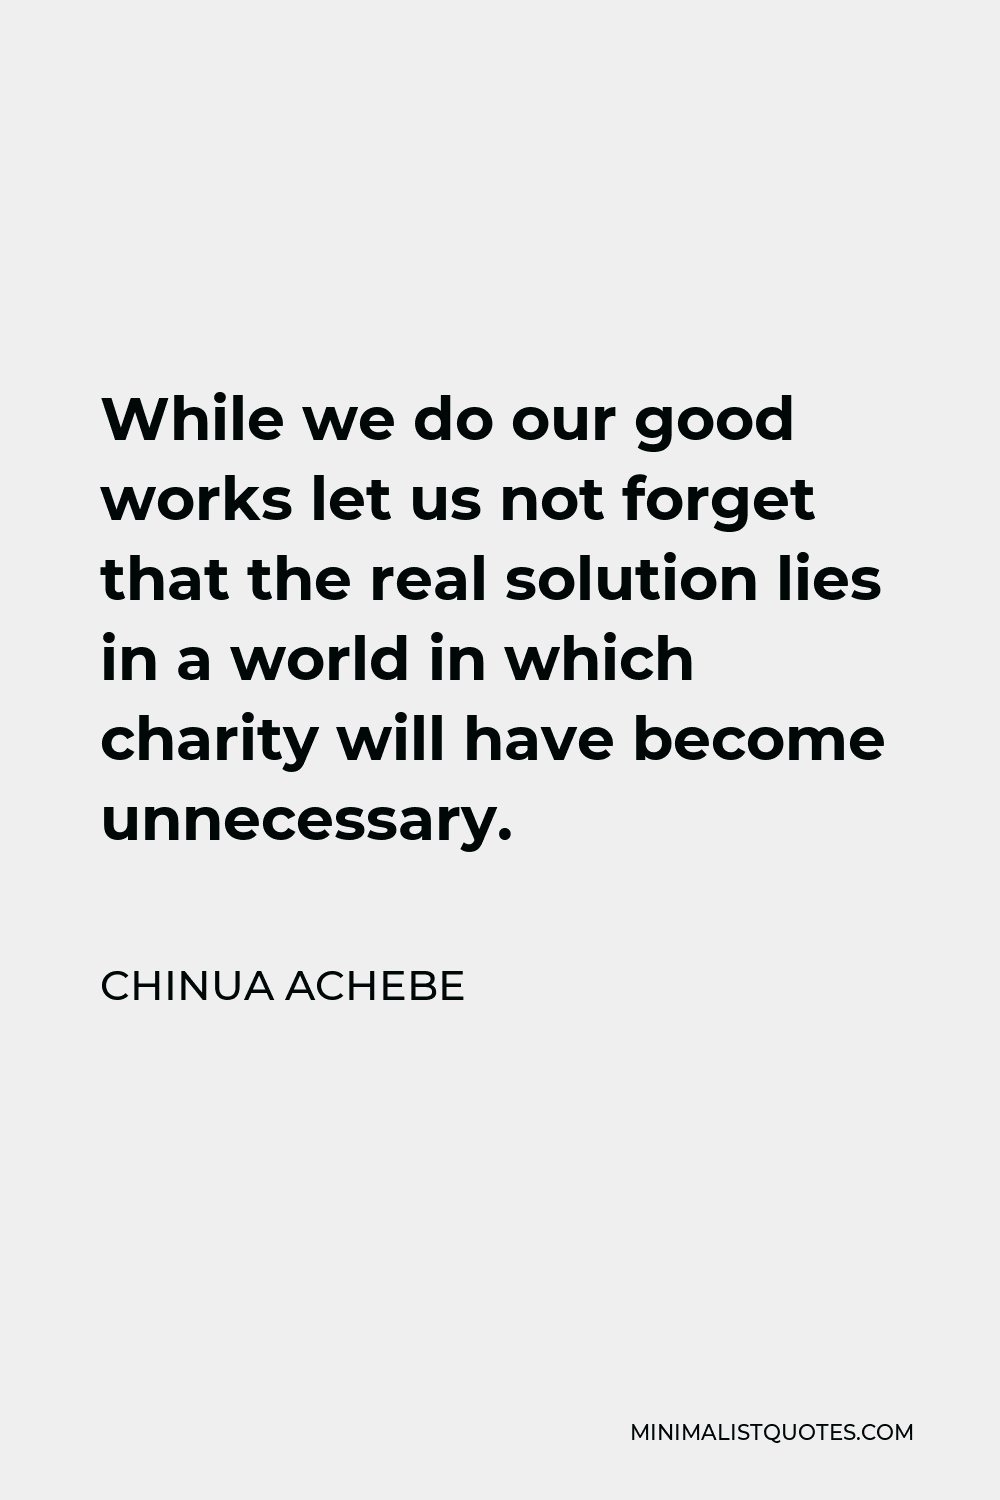 Chinua Achebe Quote - While we do our good works let us not forget that the real solution lies in a world in which charity will have become unnecessary.